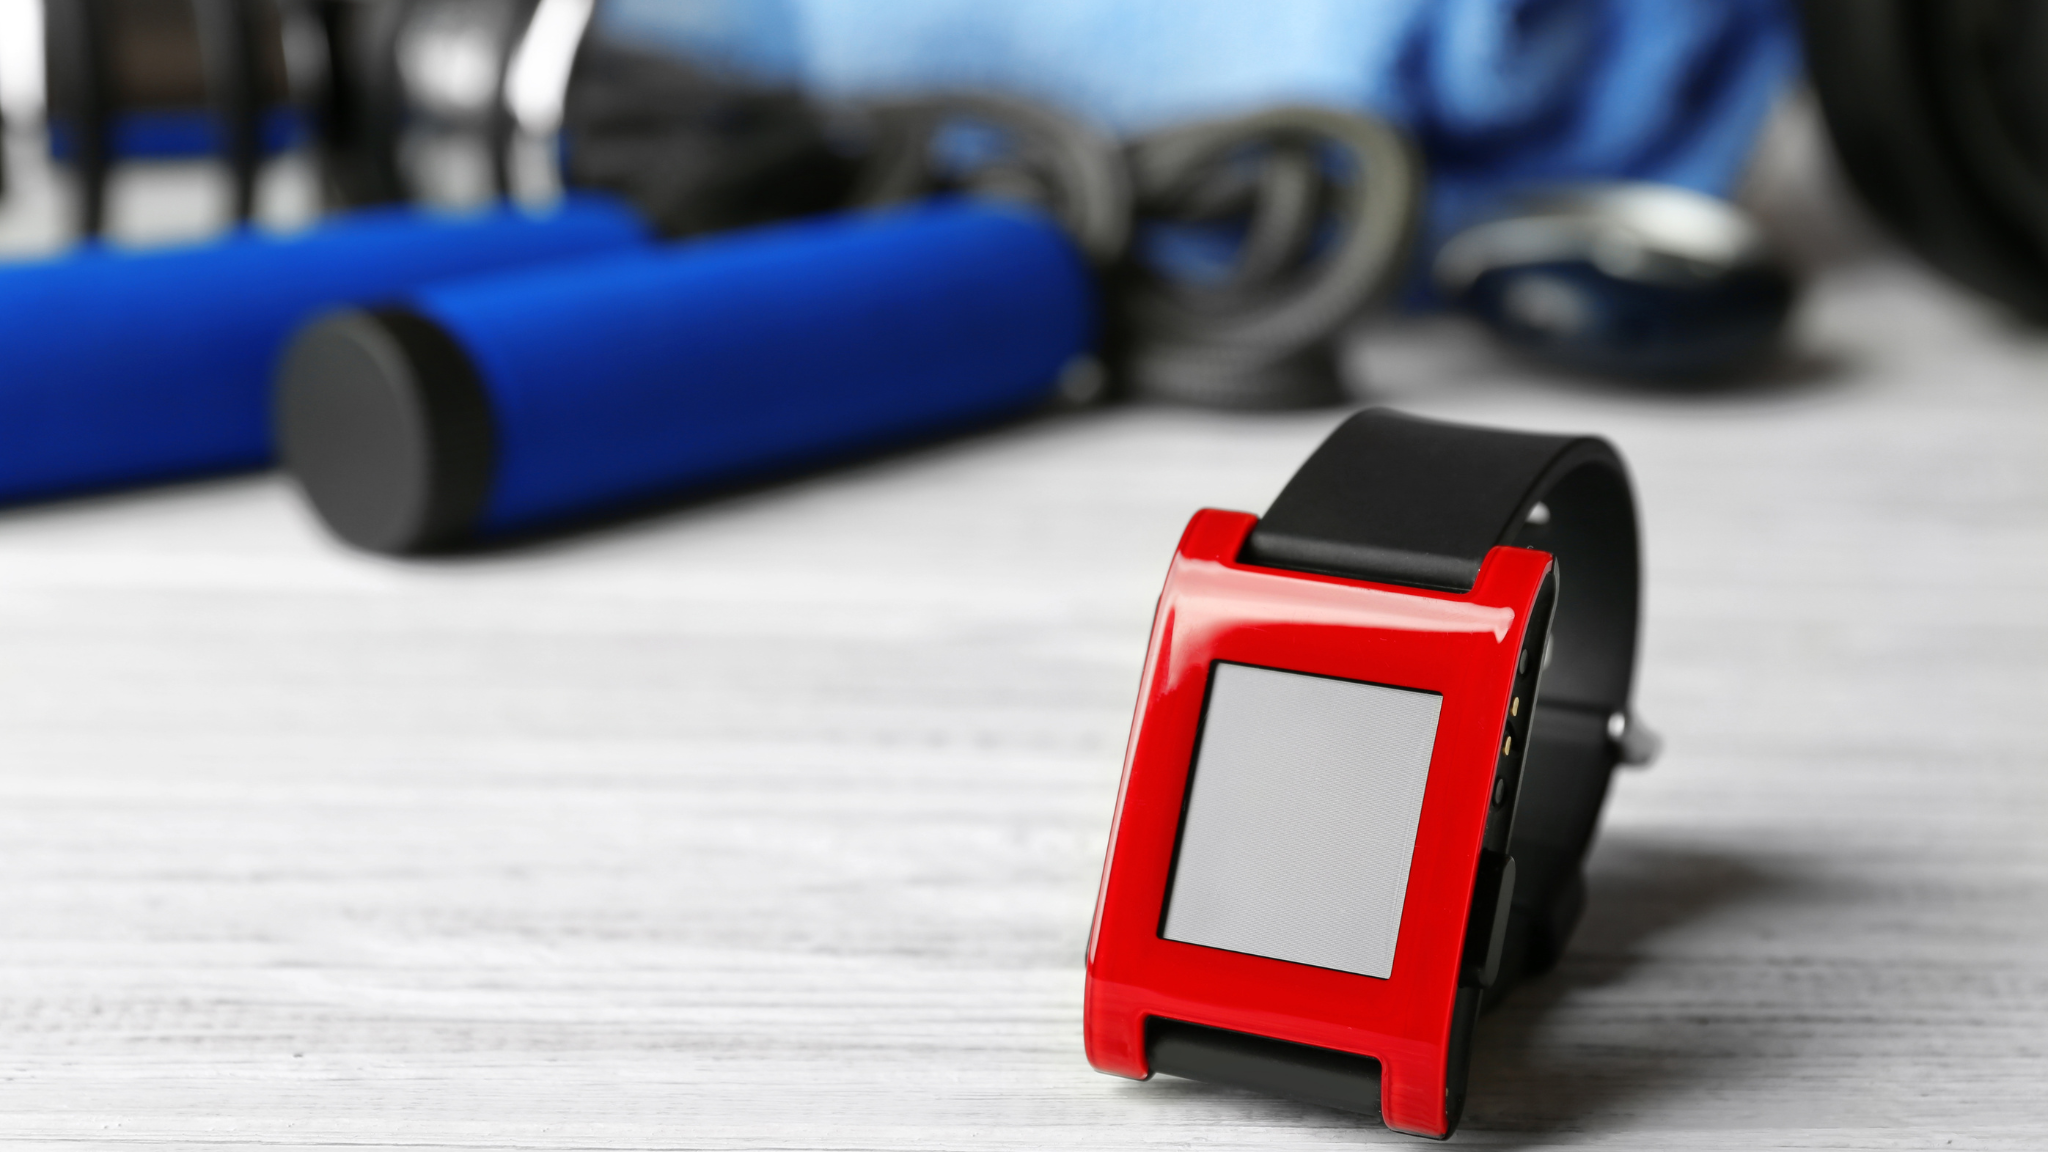 Finding a Watch that Monitors Heart Rate – Which Are the Best Ones?